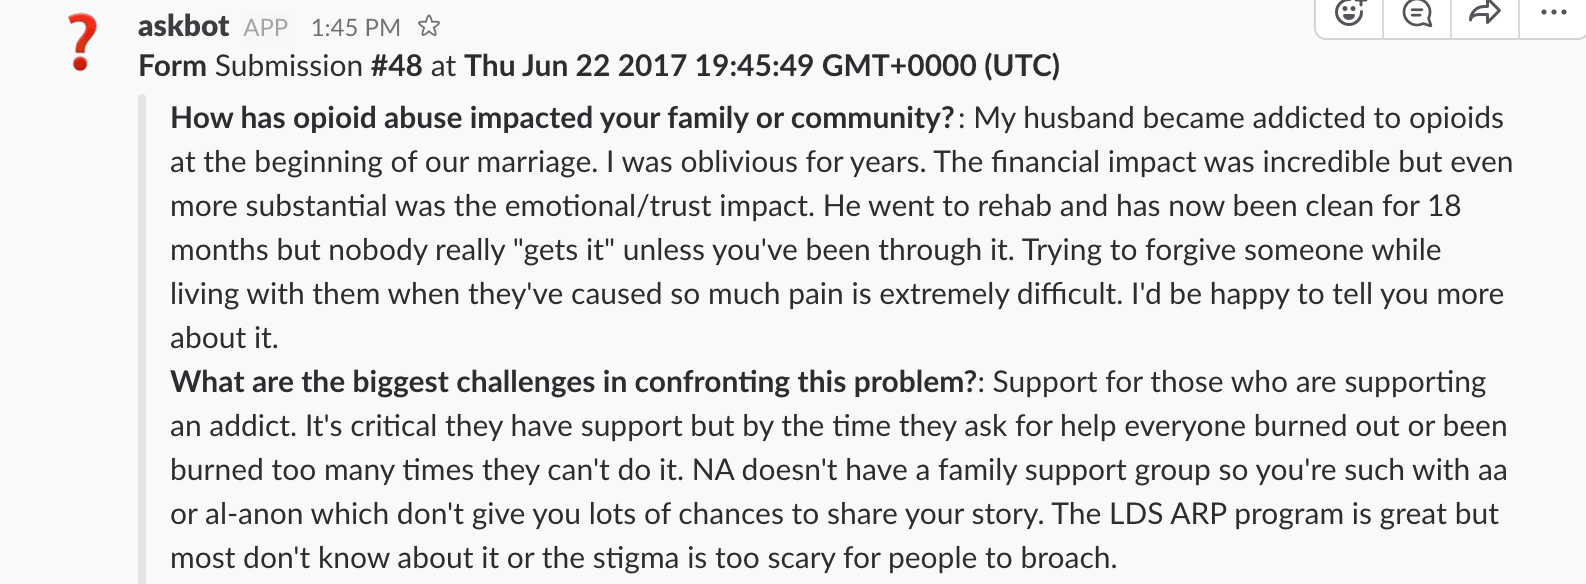 [IMAGE] A screenshot from a Slack channel of someone answering the questions with long and detailed replies about the respondent's husband's history of opioid abuse